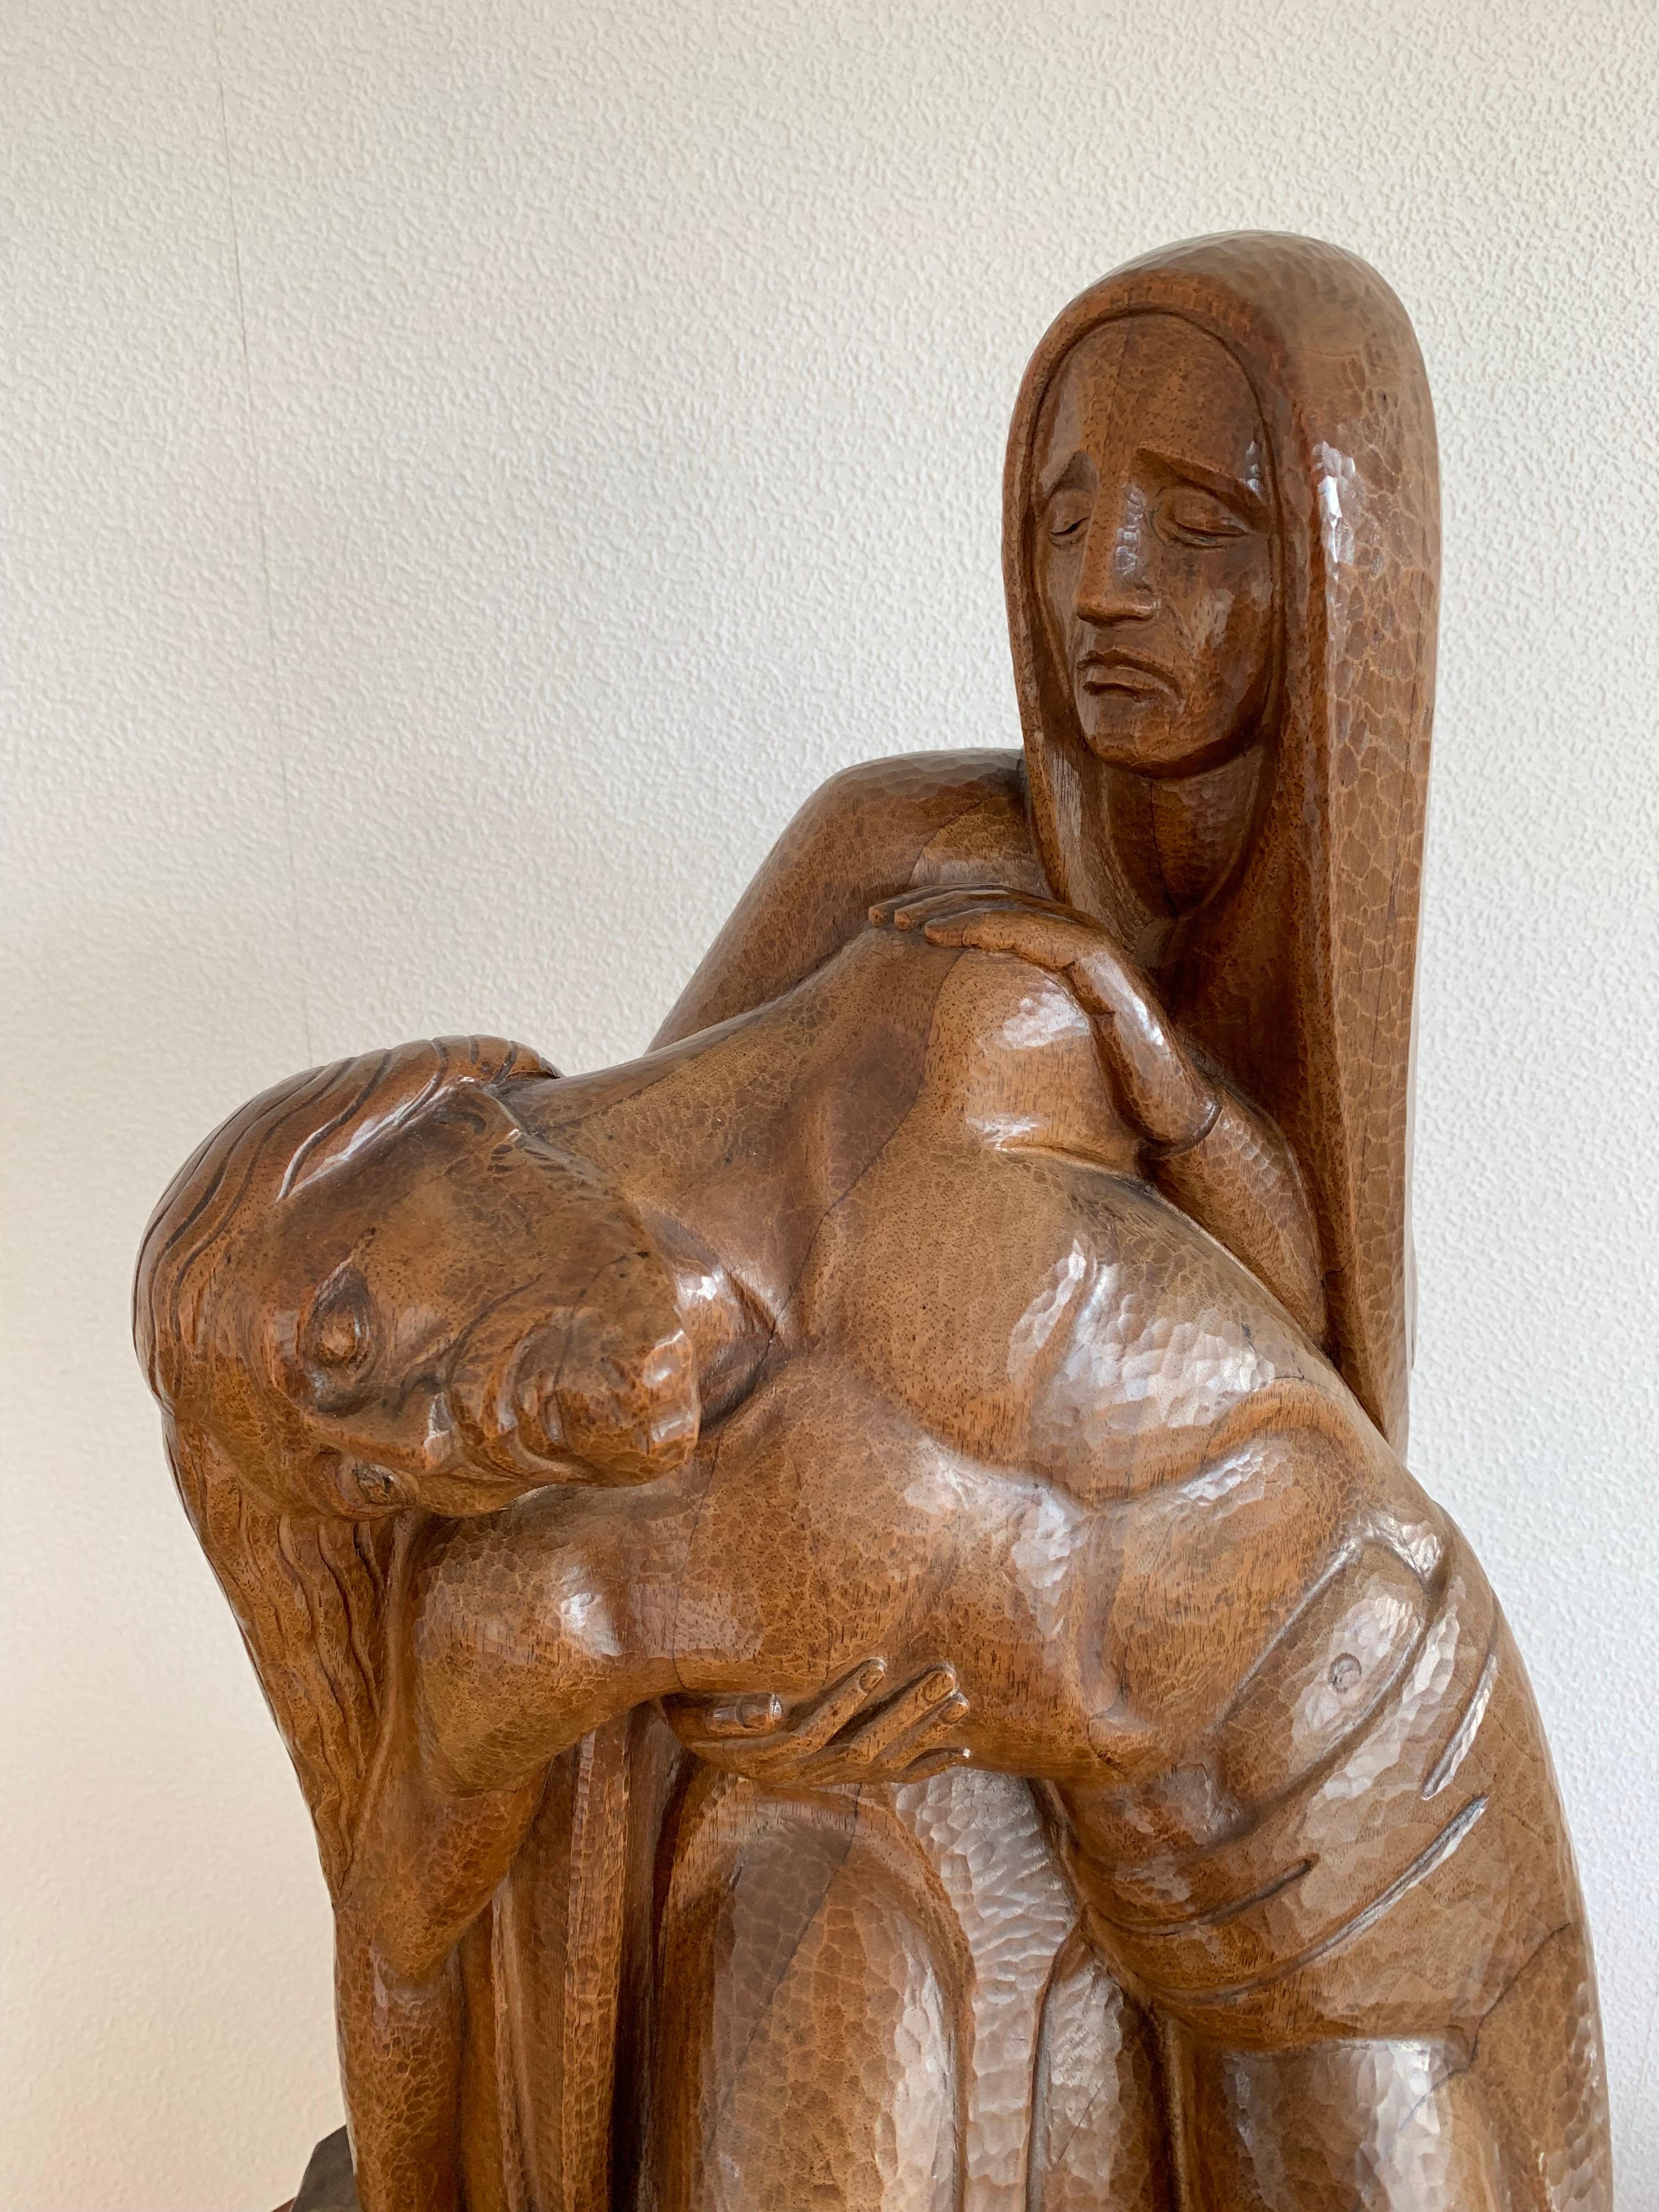 Hand-Carved Stunning & Stylish Gothic Revival Pietà Sculpture with the Original Pedestal